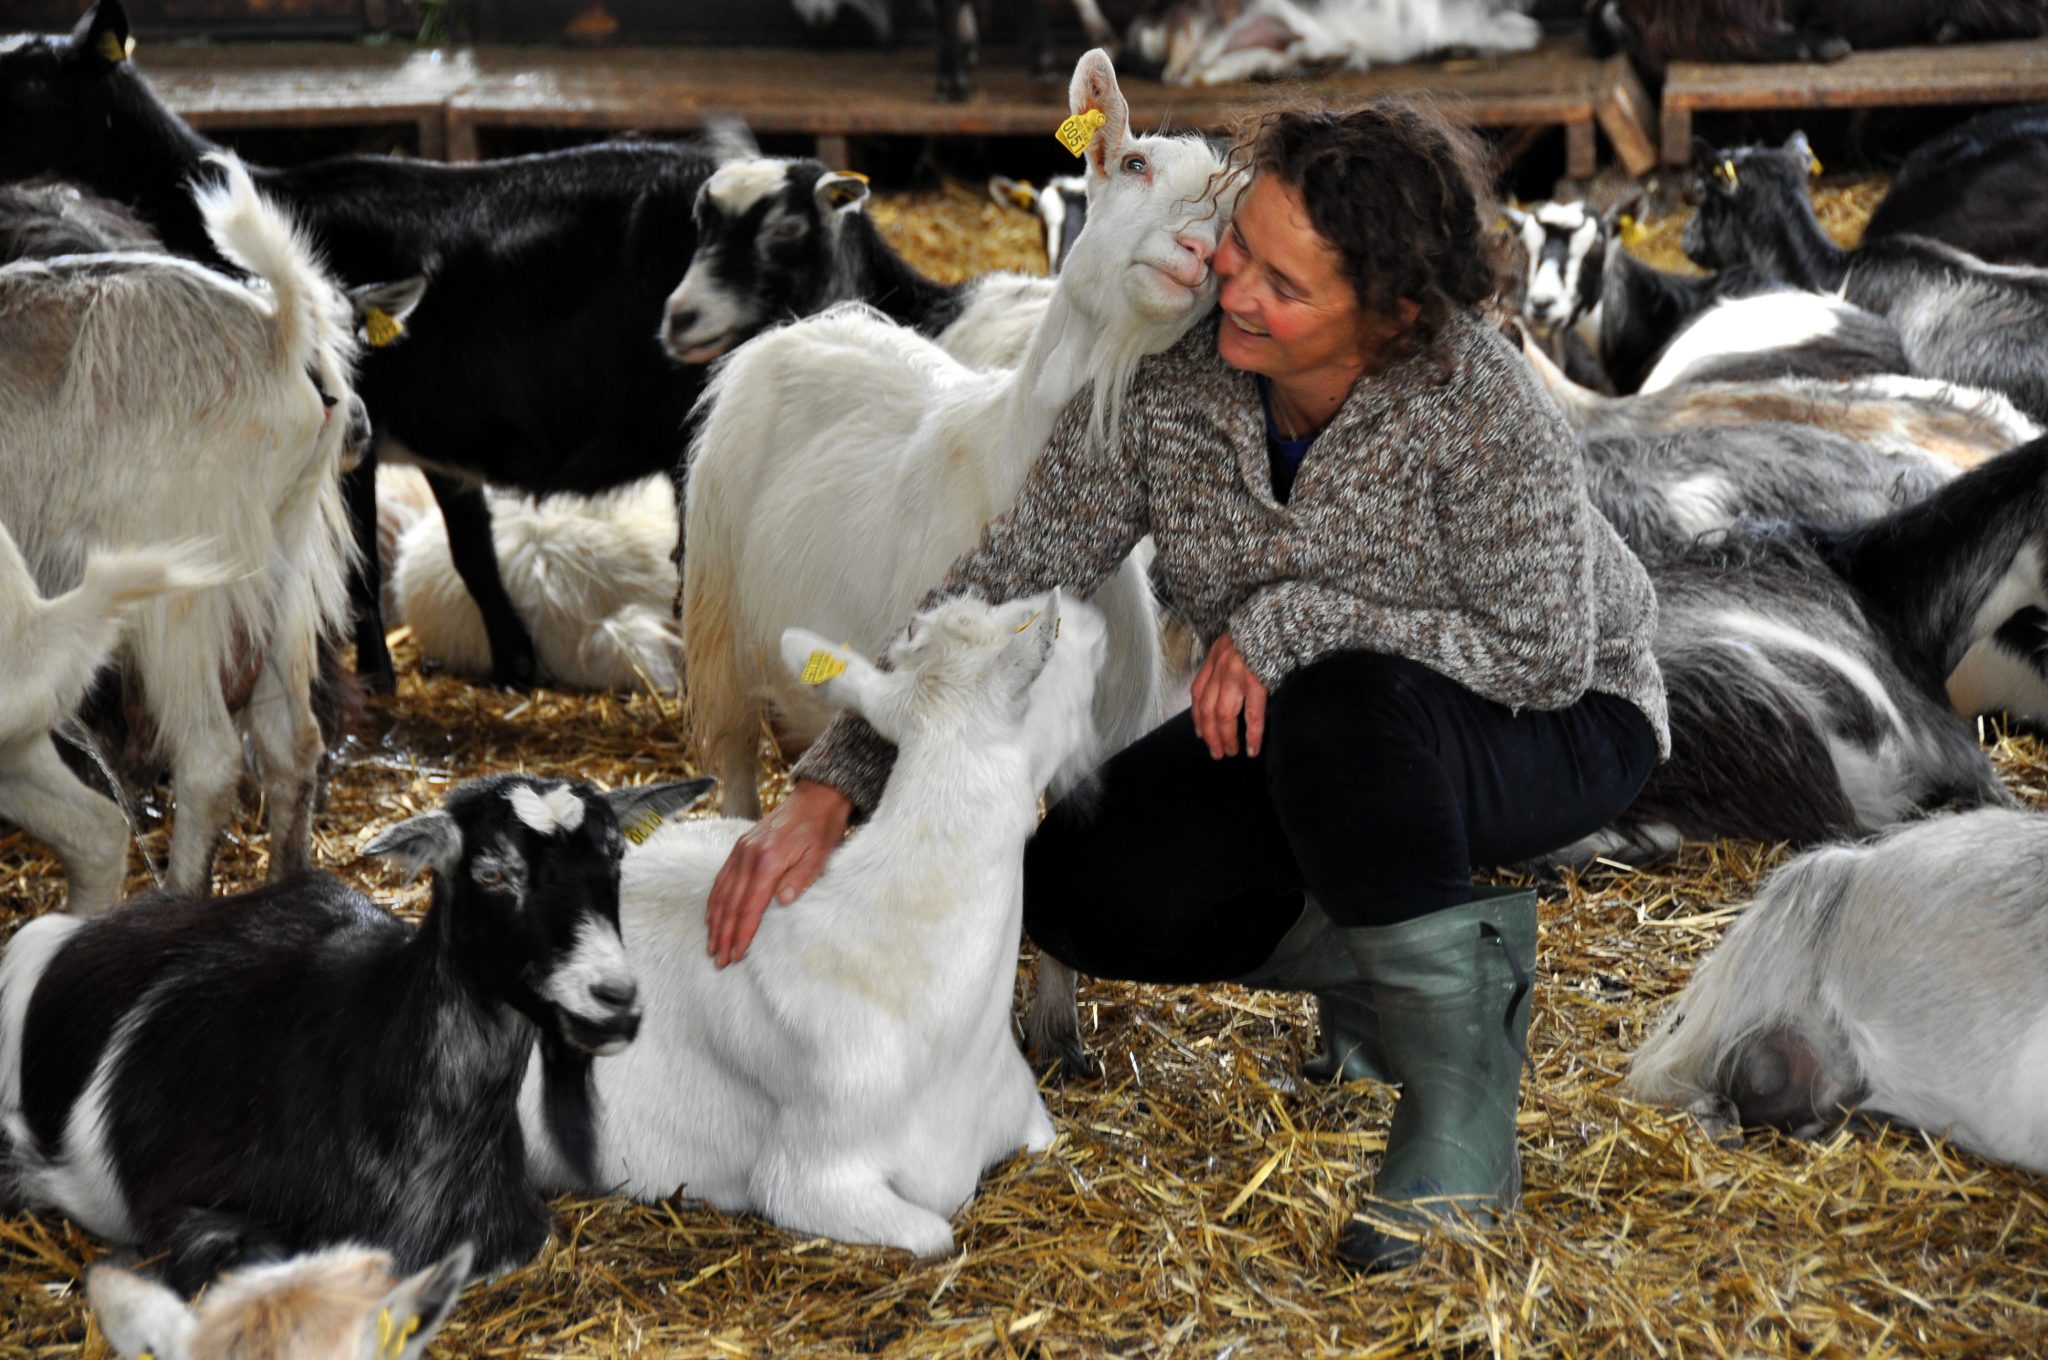 There is a lot of love in goat cheese production. Photo: Lofoten Gårdsysteri